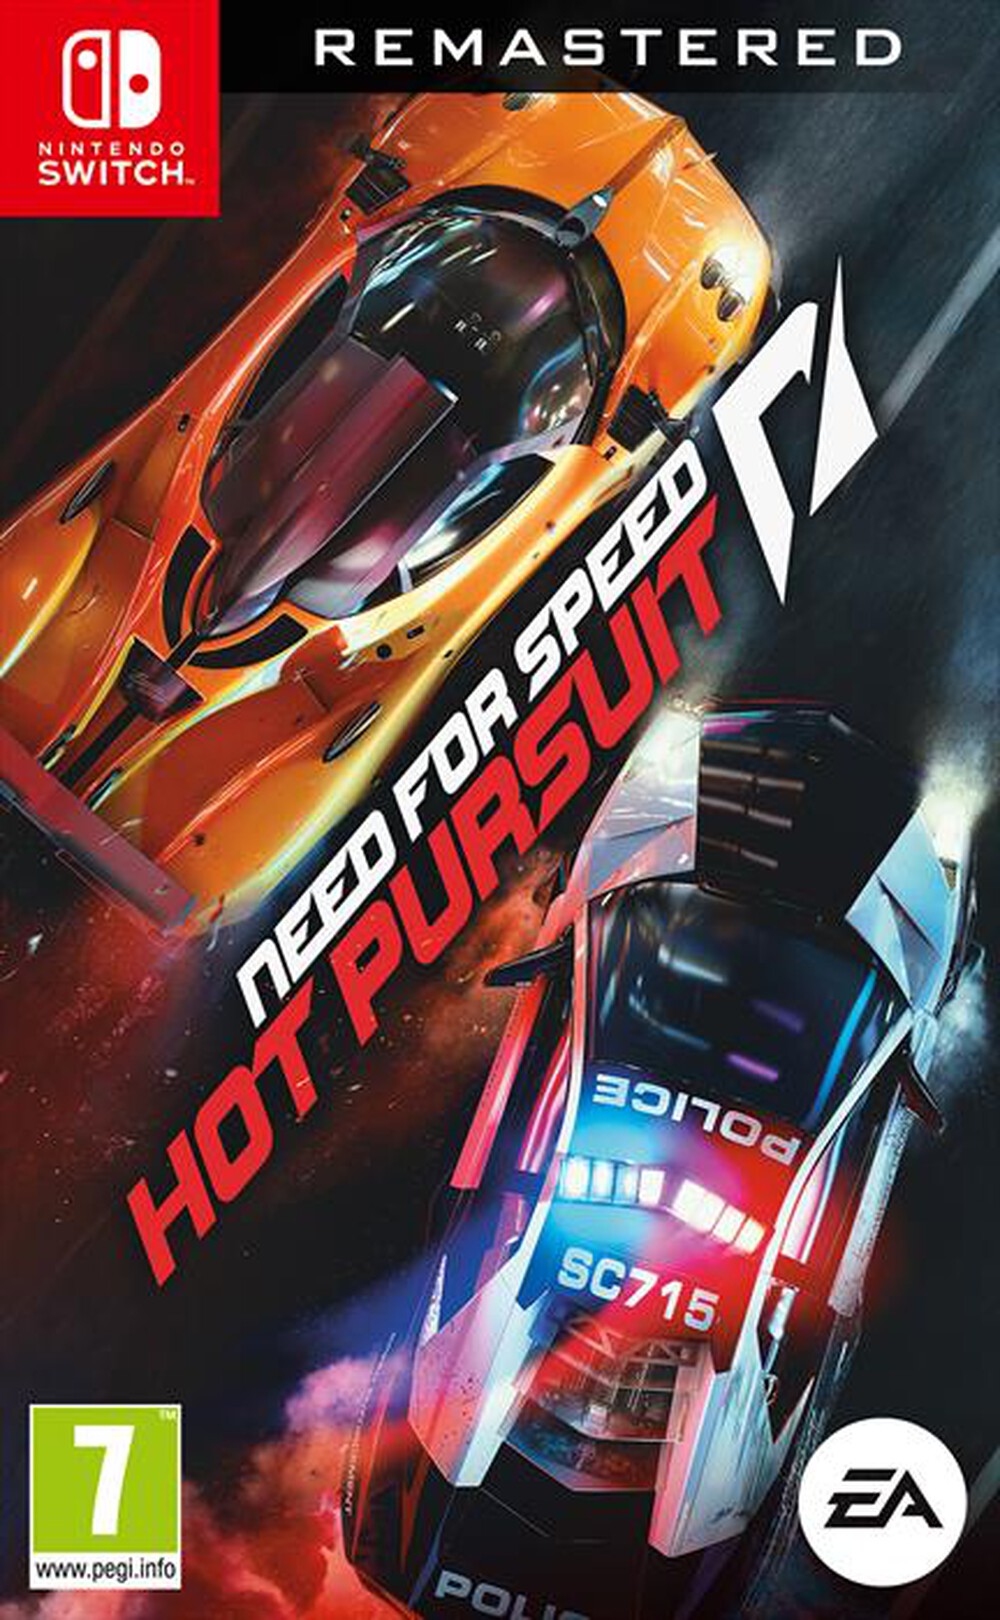 "ELECTRONIC ARTS - NEED FOR SPEED HOT PURSUIT REMASTERED SWITCH"